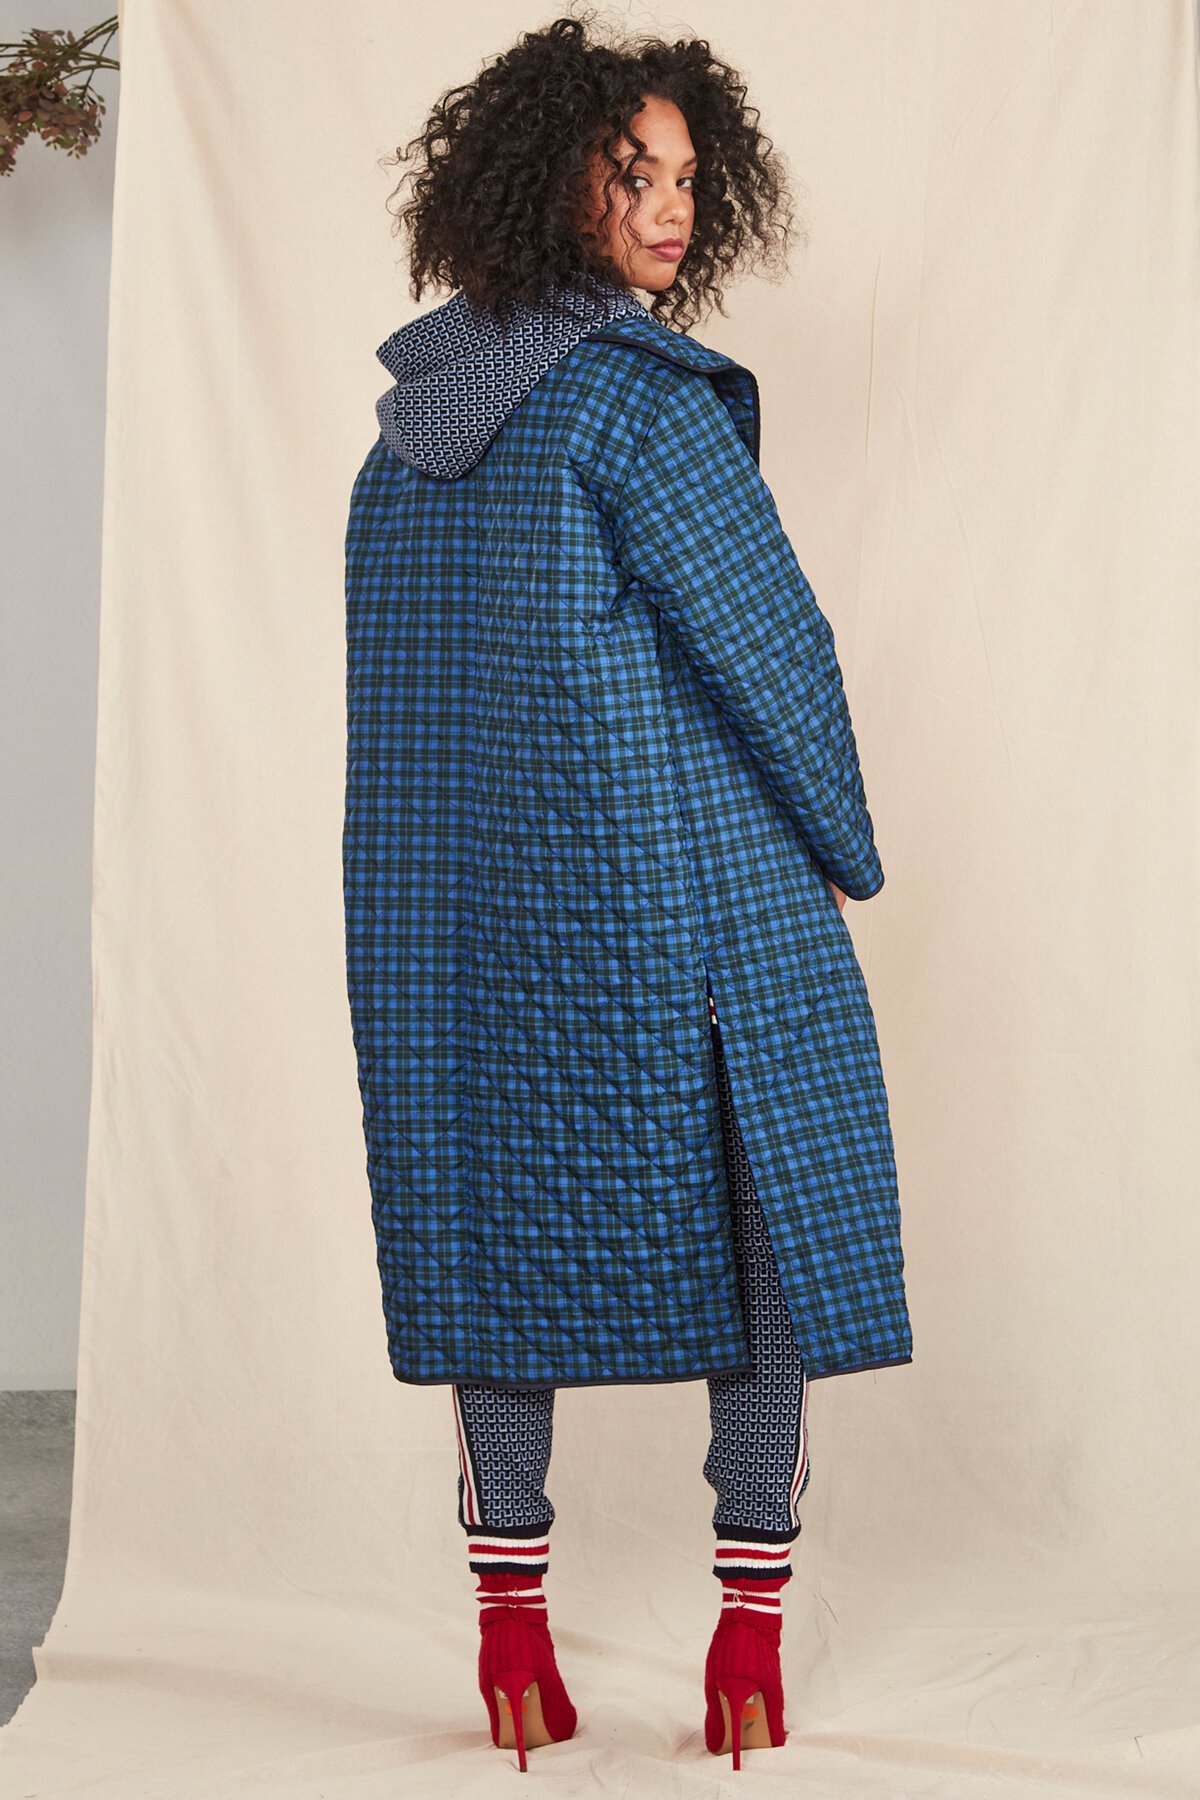 TAKE A PUFF Coat - Curate : Trelise Cooper Online - GOOD GIRLS GONE ...